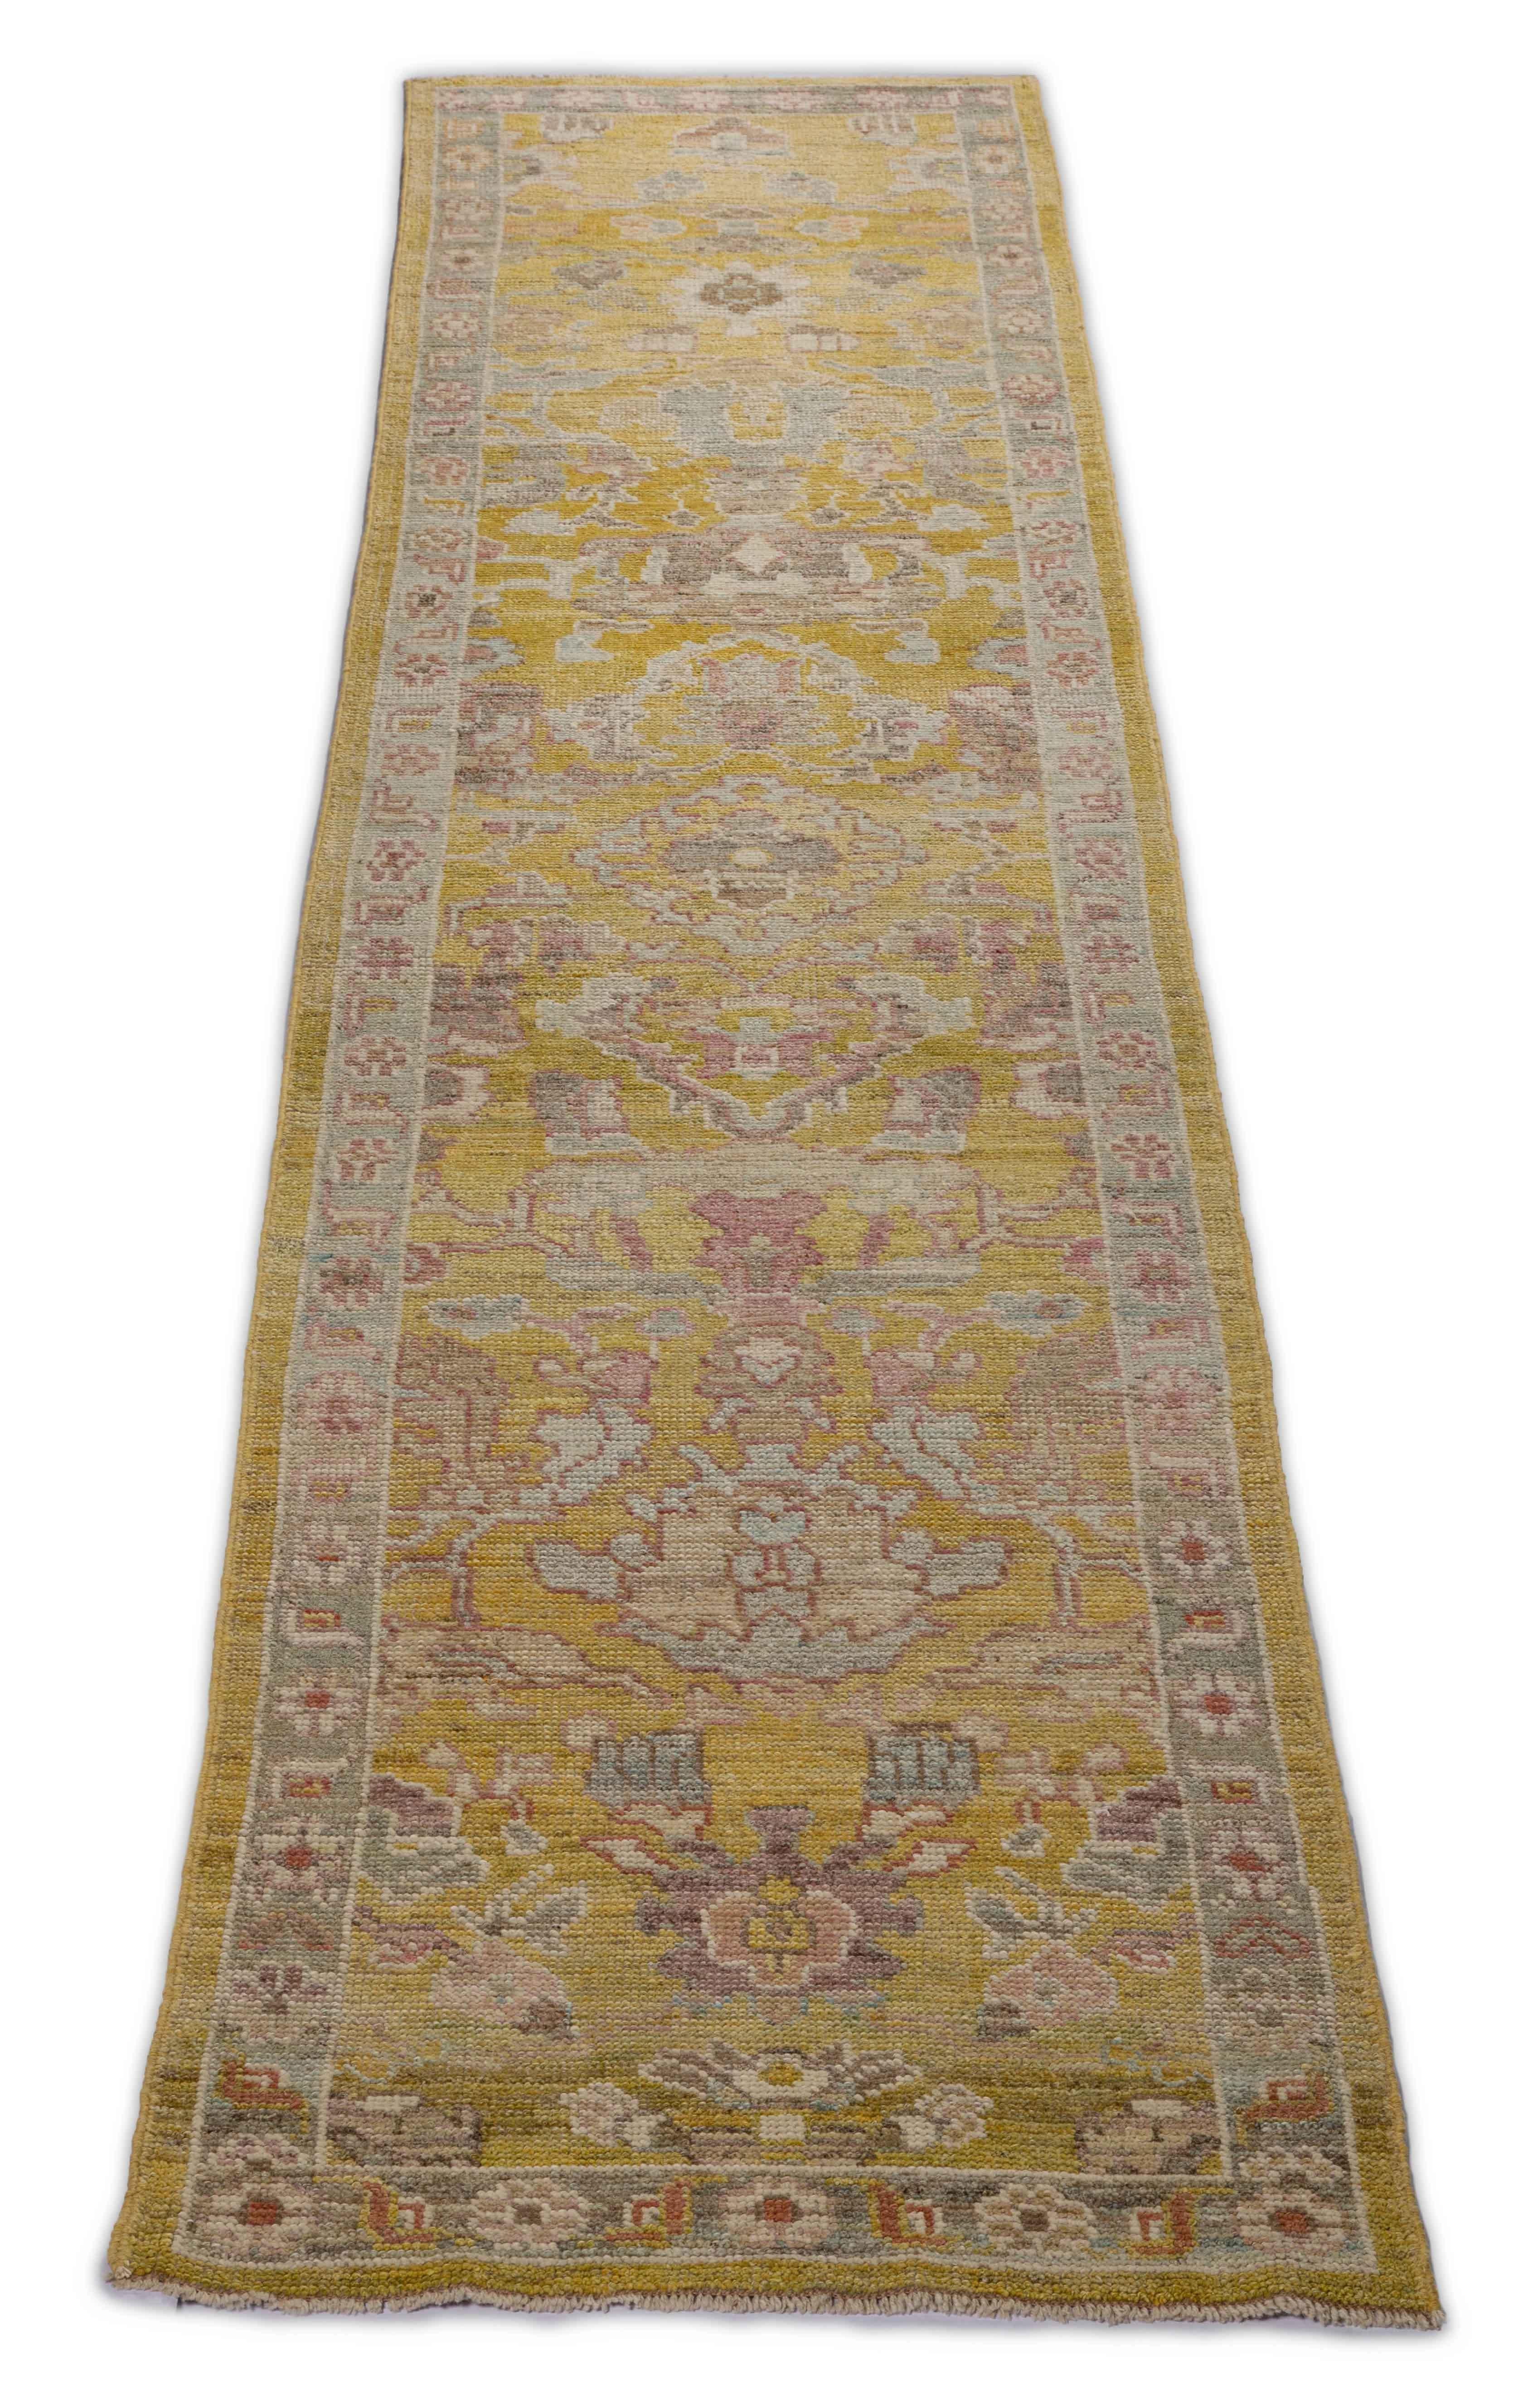  New Turkish runner rug made of handwoven sheep’s wool of the finest quality. It’s colored with organic vegetable dyes that are certified safe for humans and pets alike. It features a long, gray field with flower details allover in gold and pink